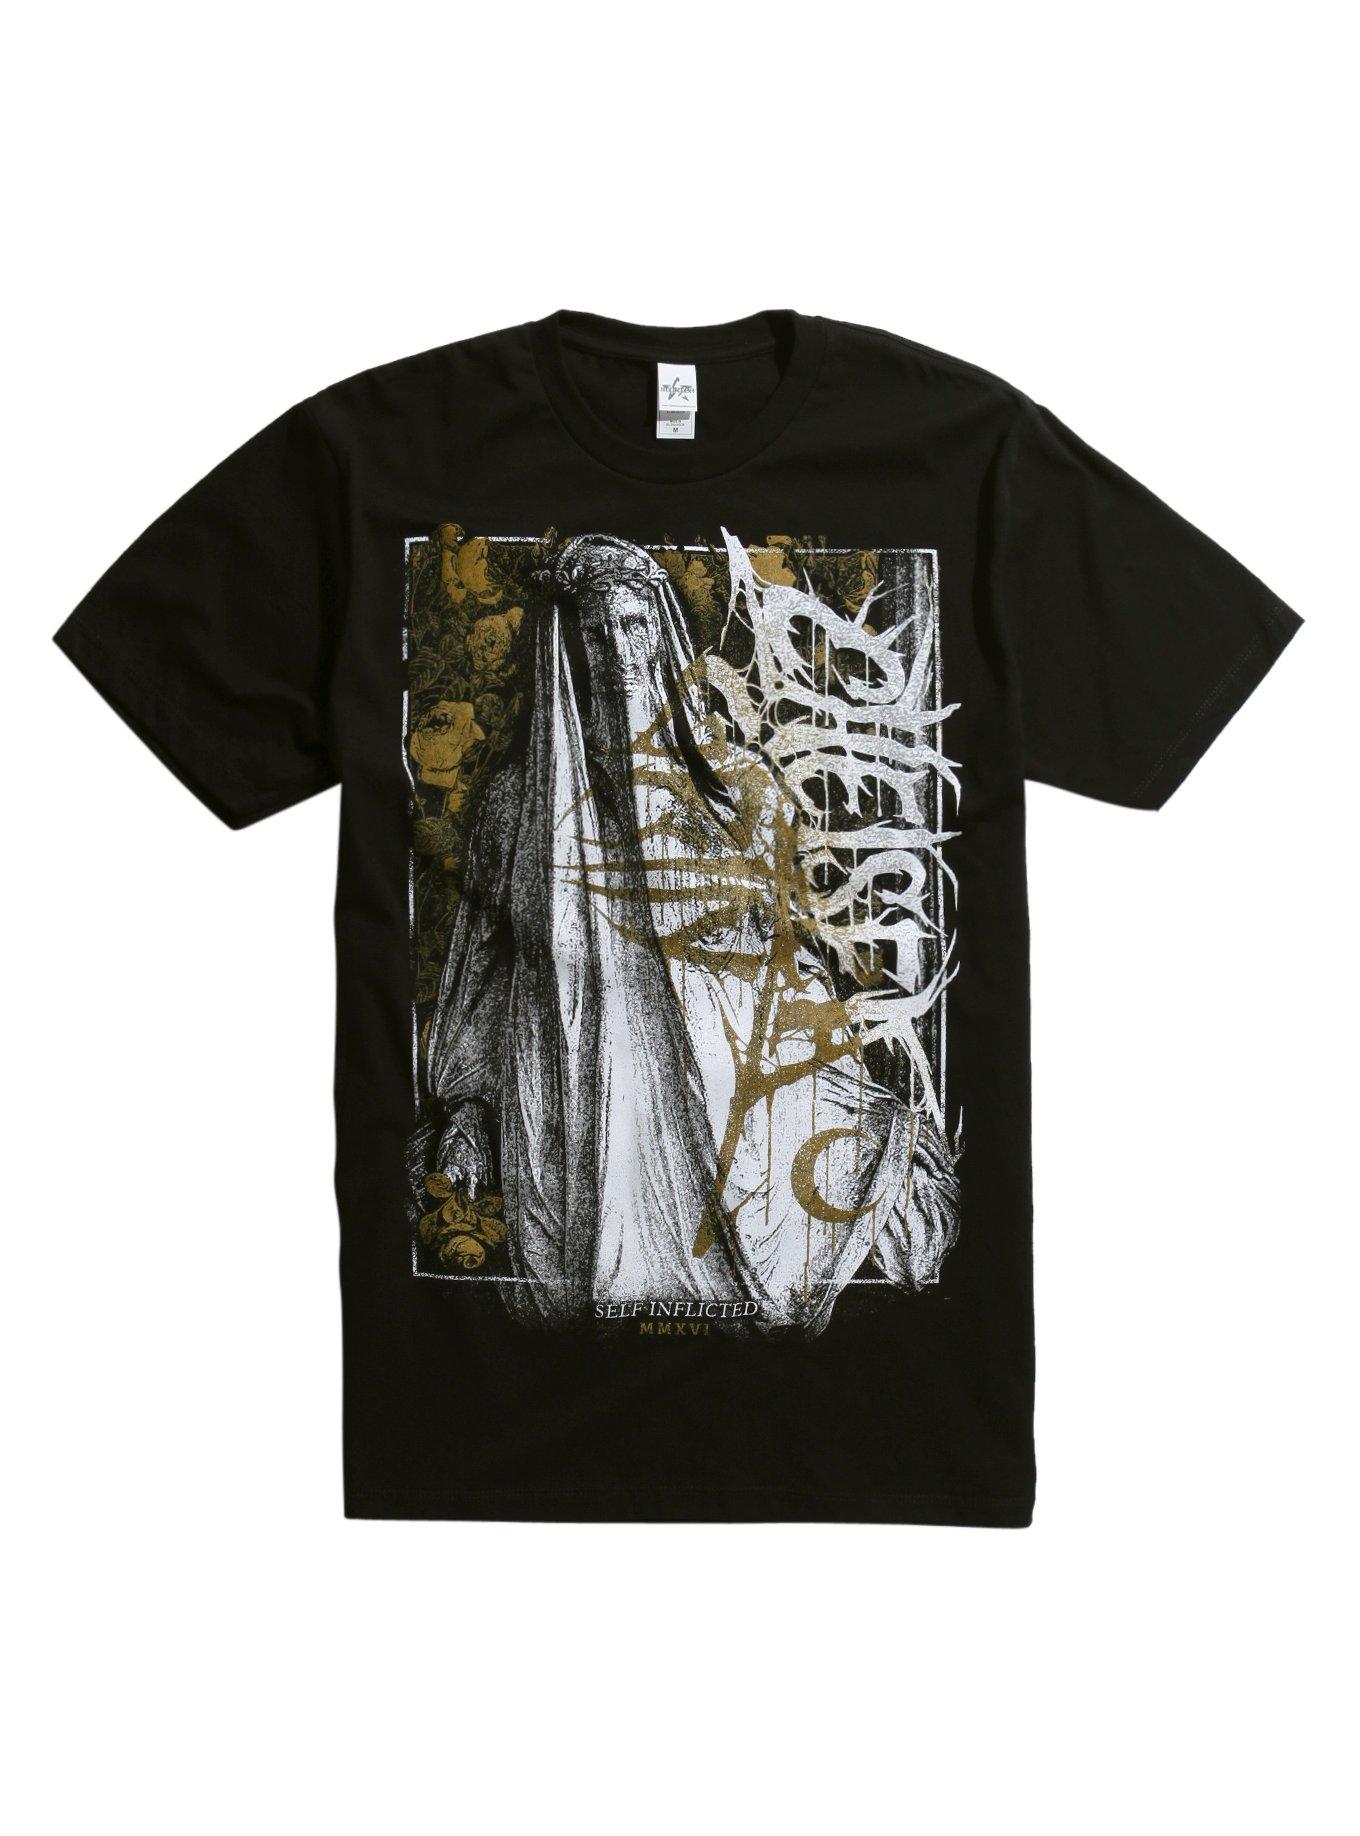 Chelsea Grin Self Inflicted T-Shirt | Hot Topic